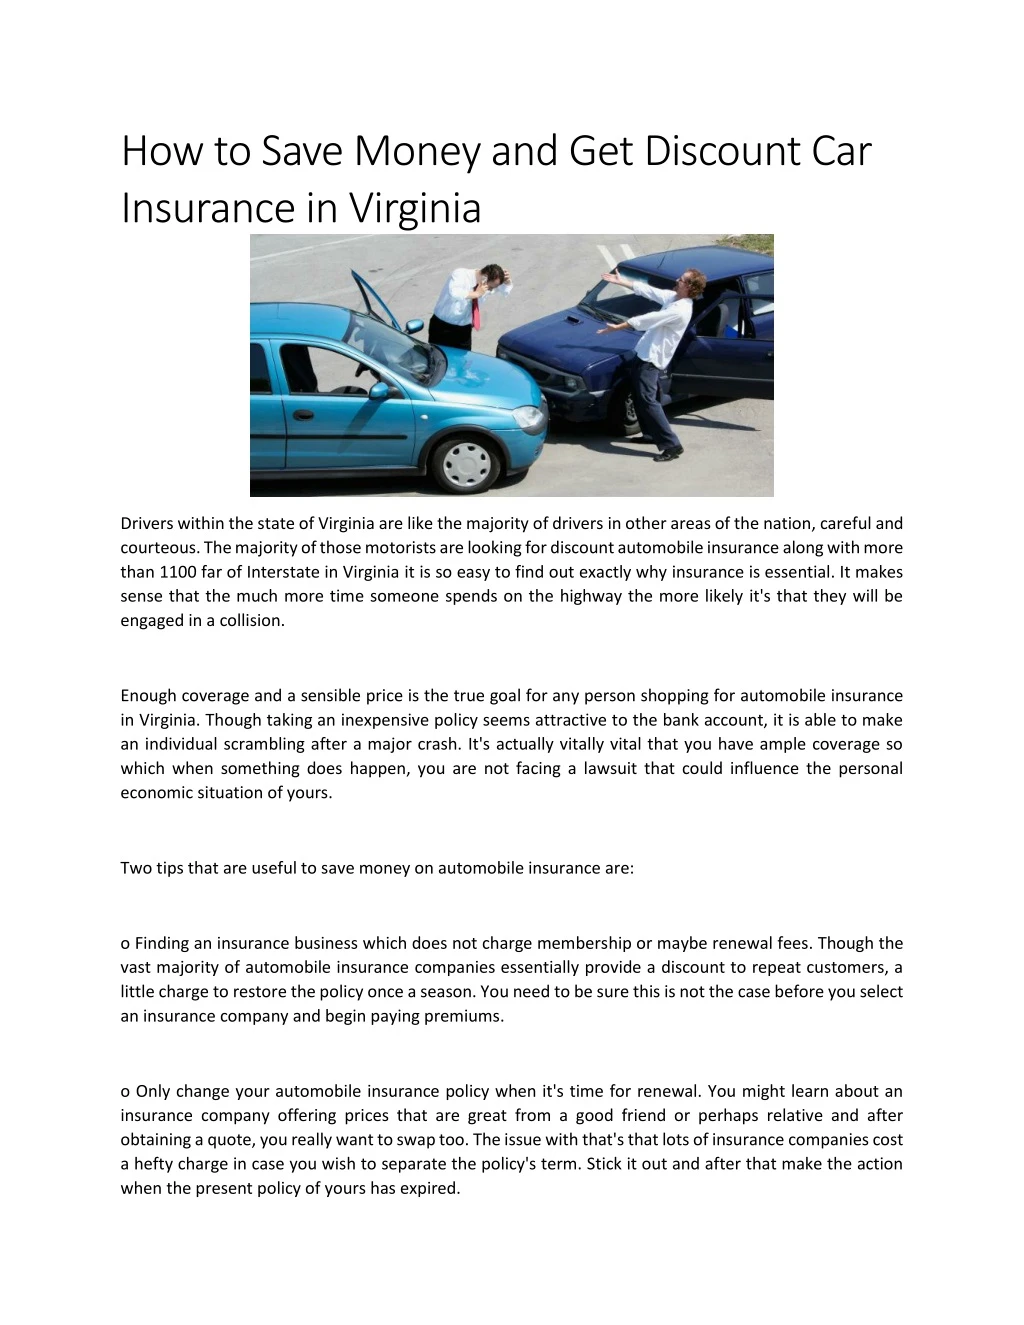 how to save money and get discount car insurance